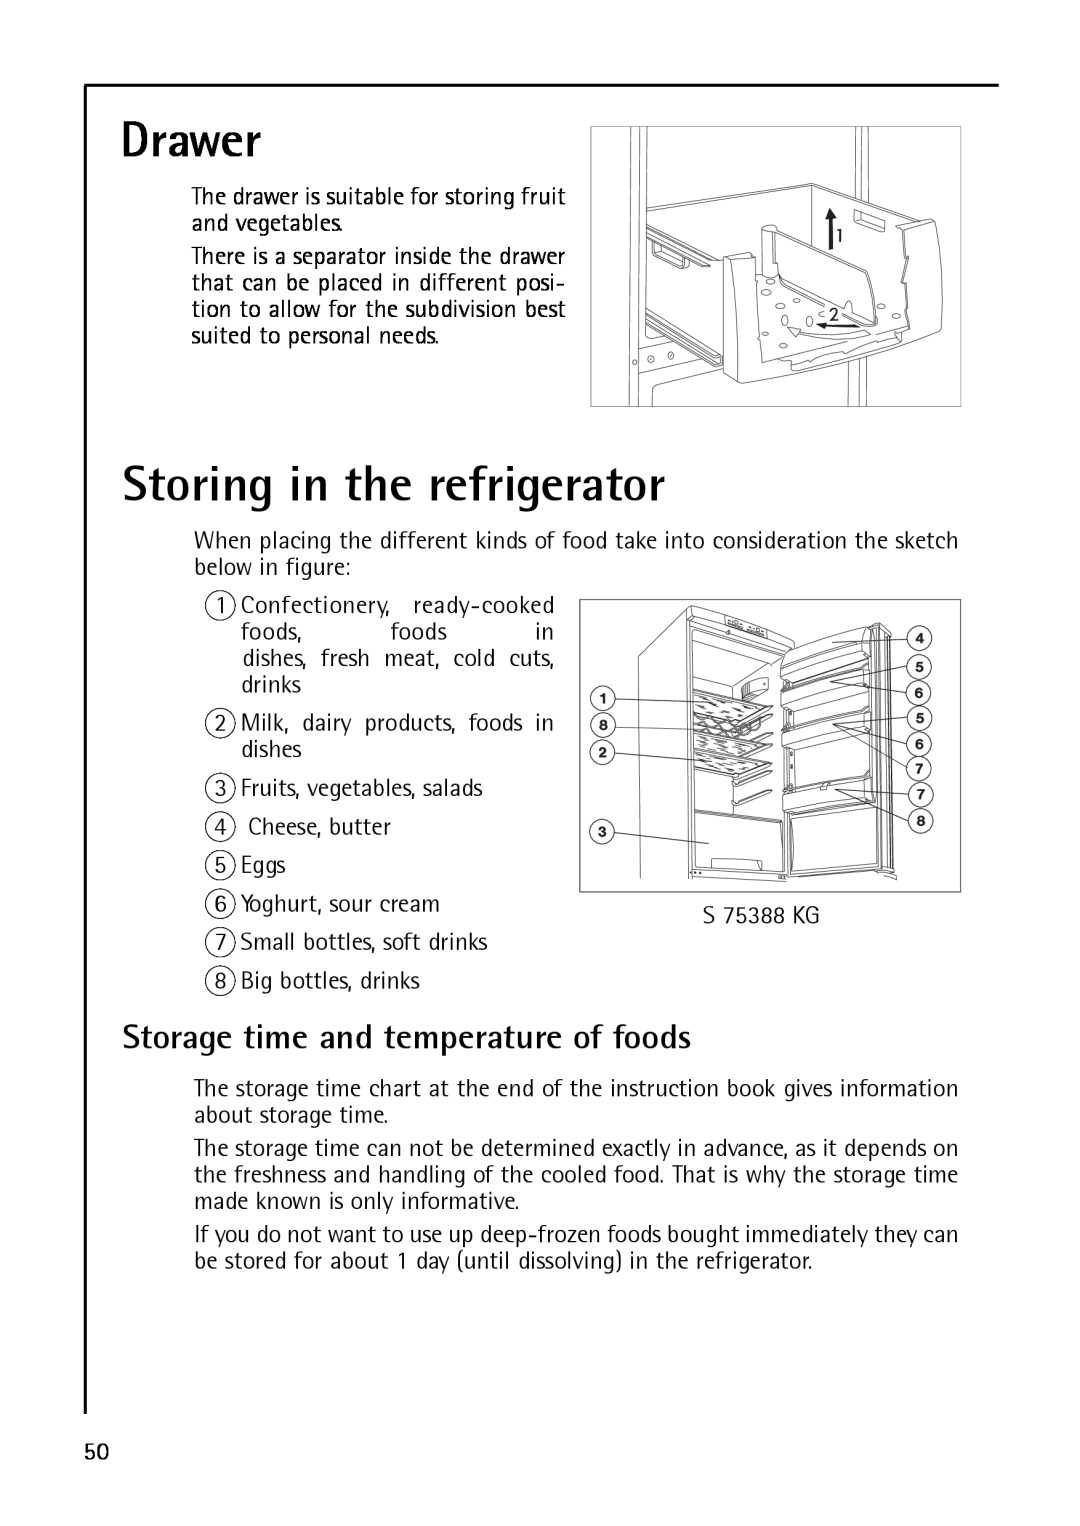 AEG S 75388 KG8, S75348 KG8, S 75348 KG manual Drawer, Storing in the refrigerator, Storage time and temperature of foods 